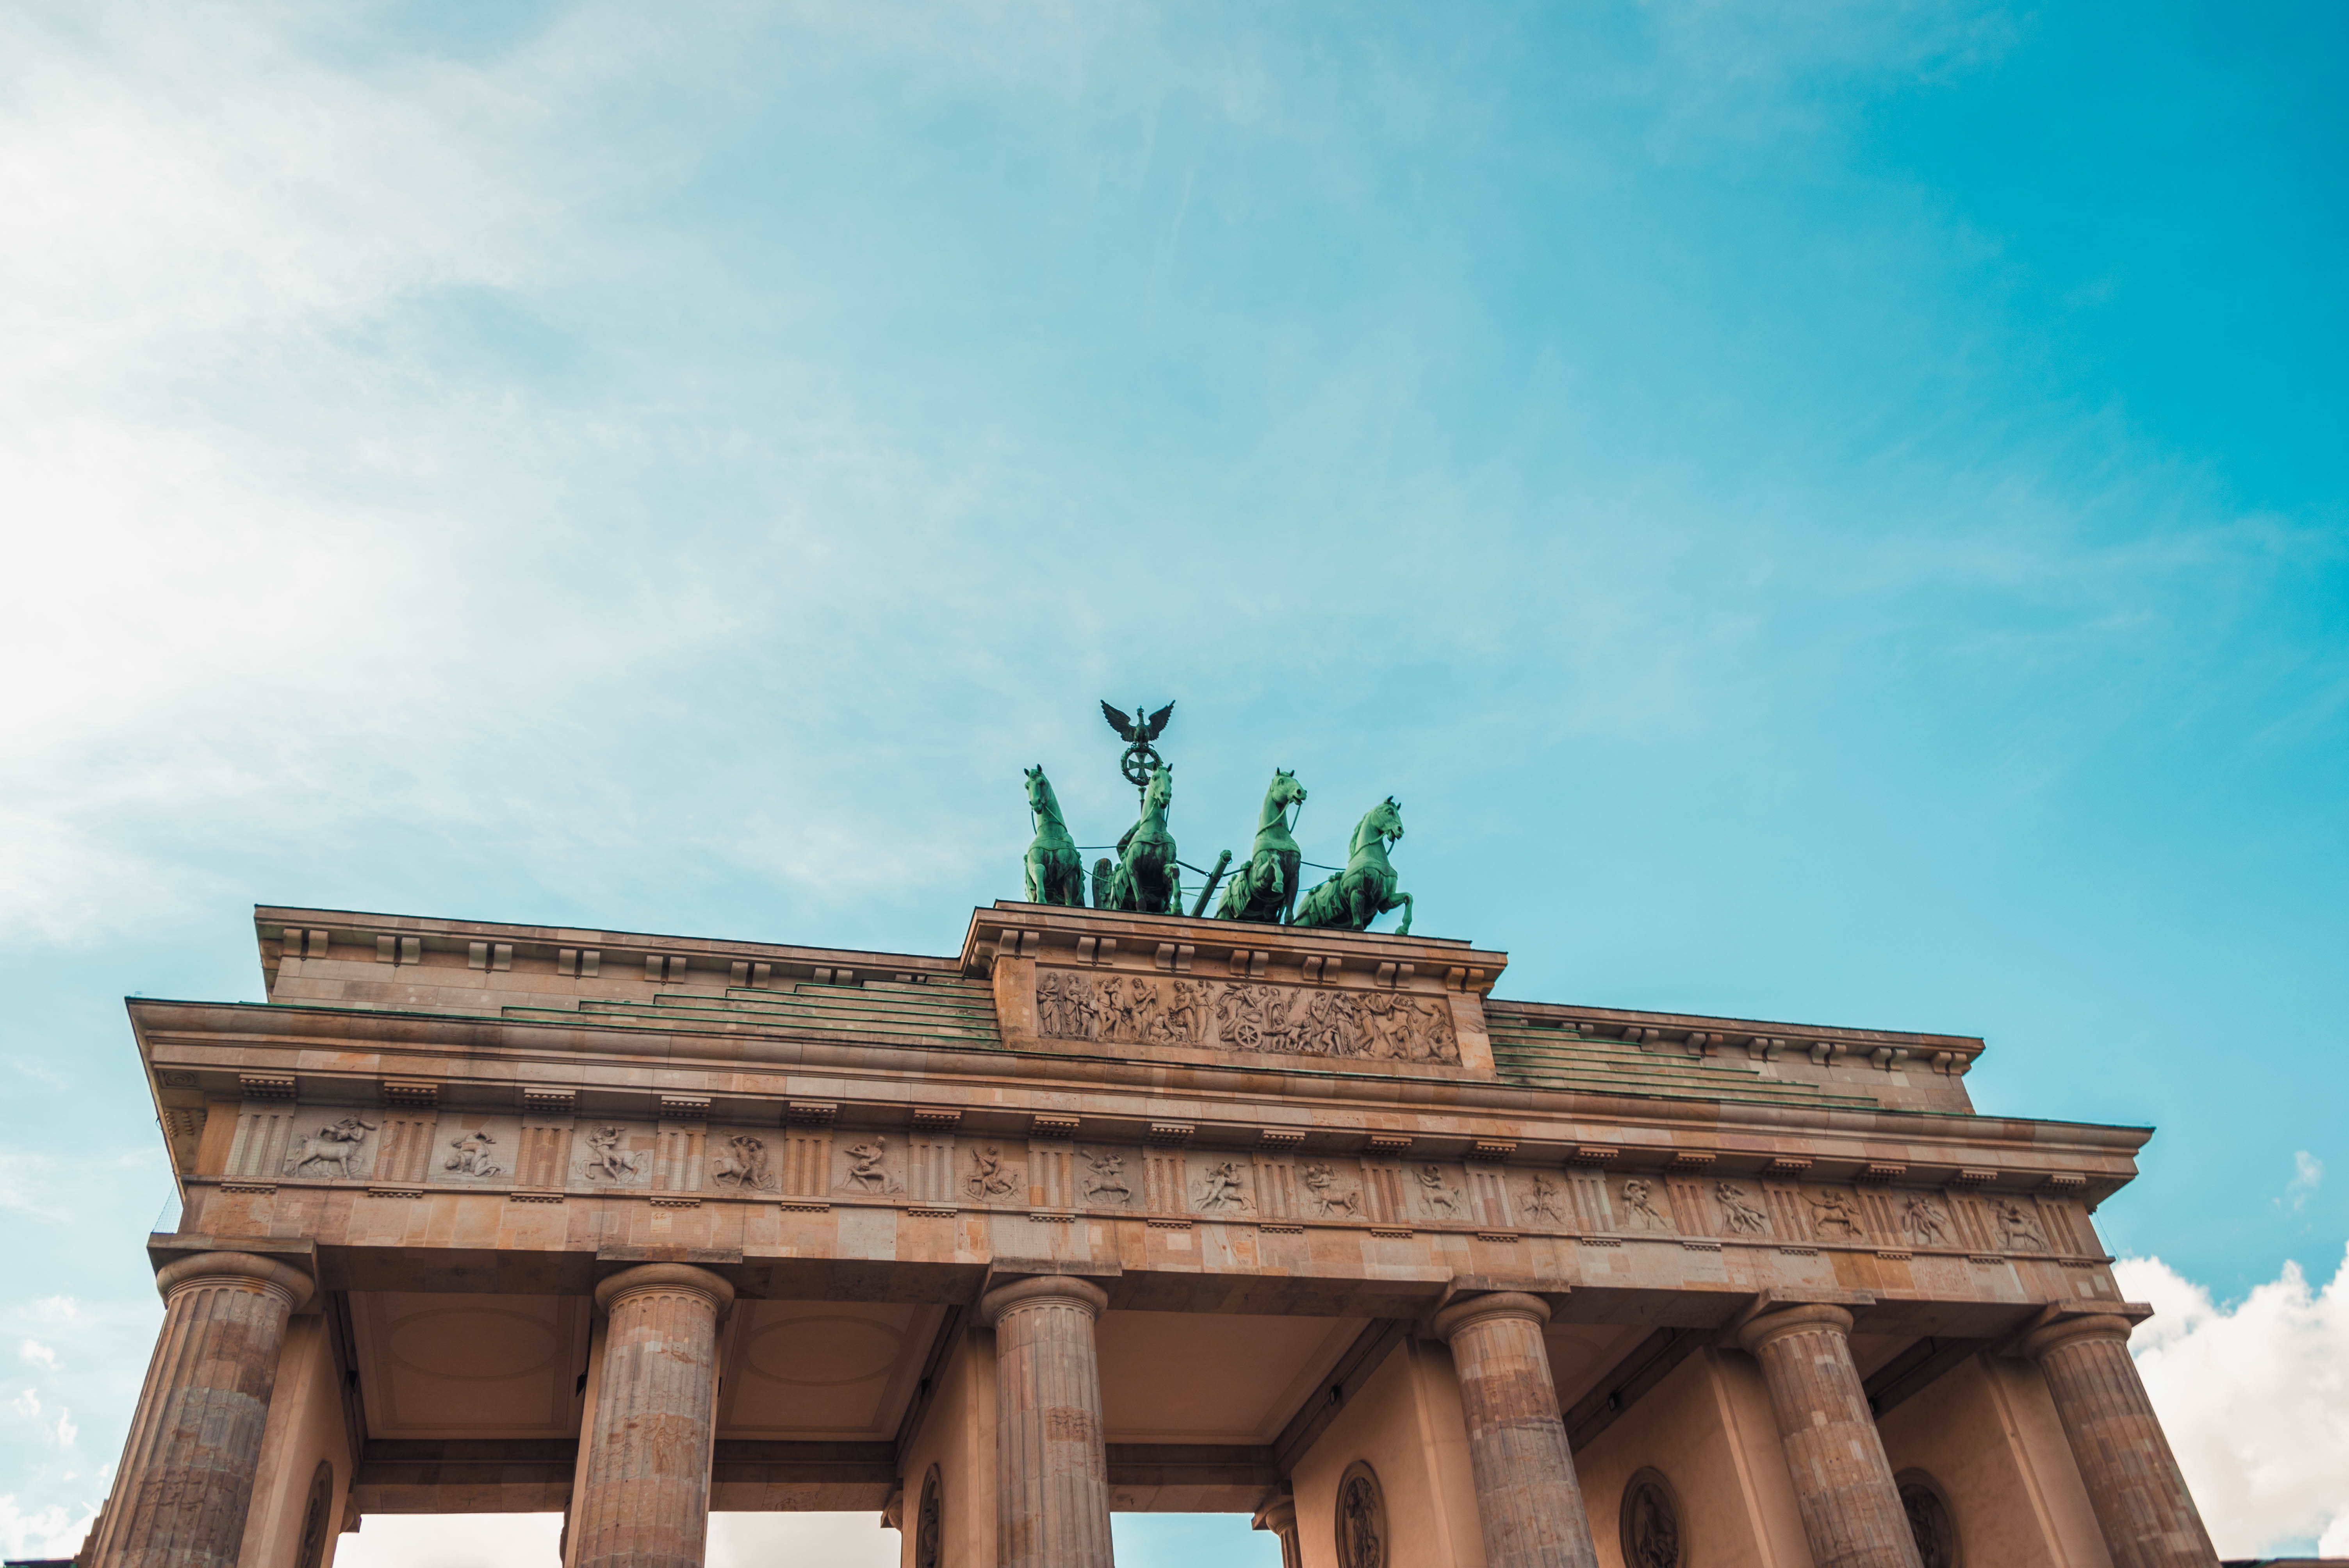 Germany: deadline extension for submitting 13th VAT Directive refund applications